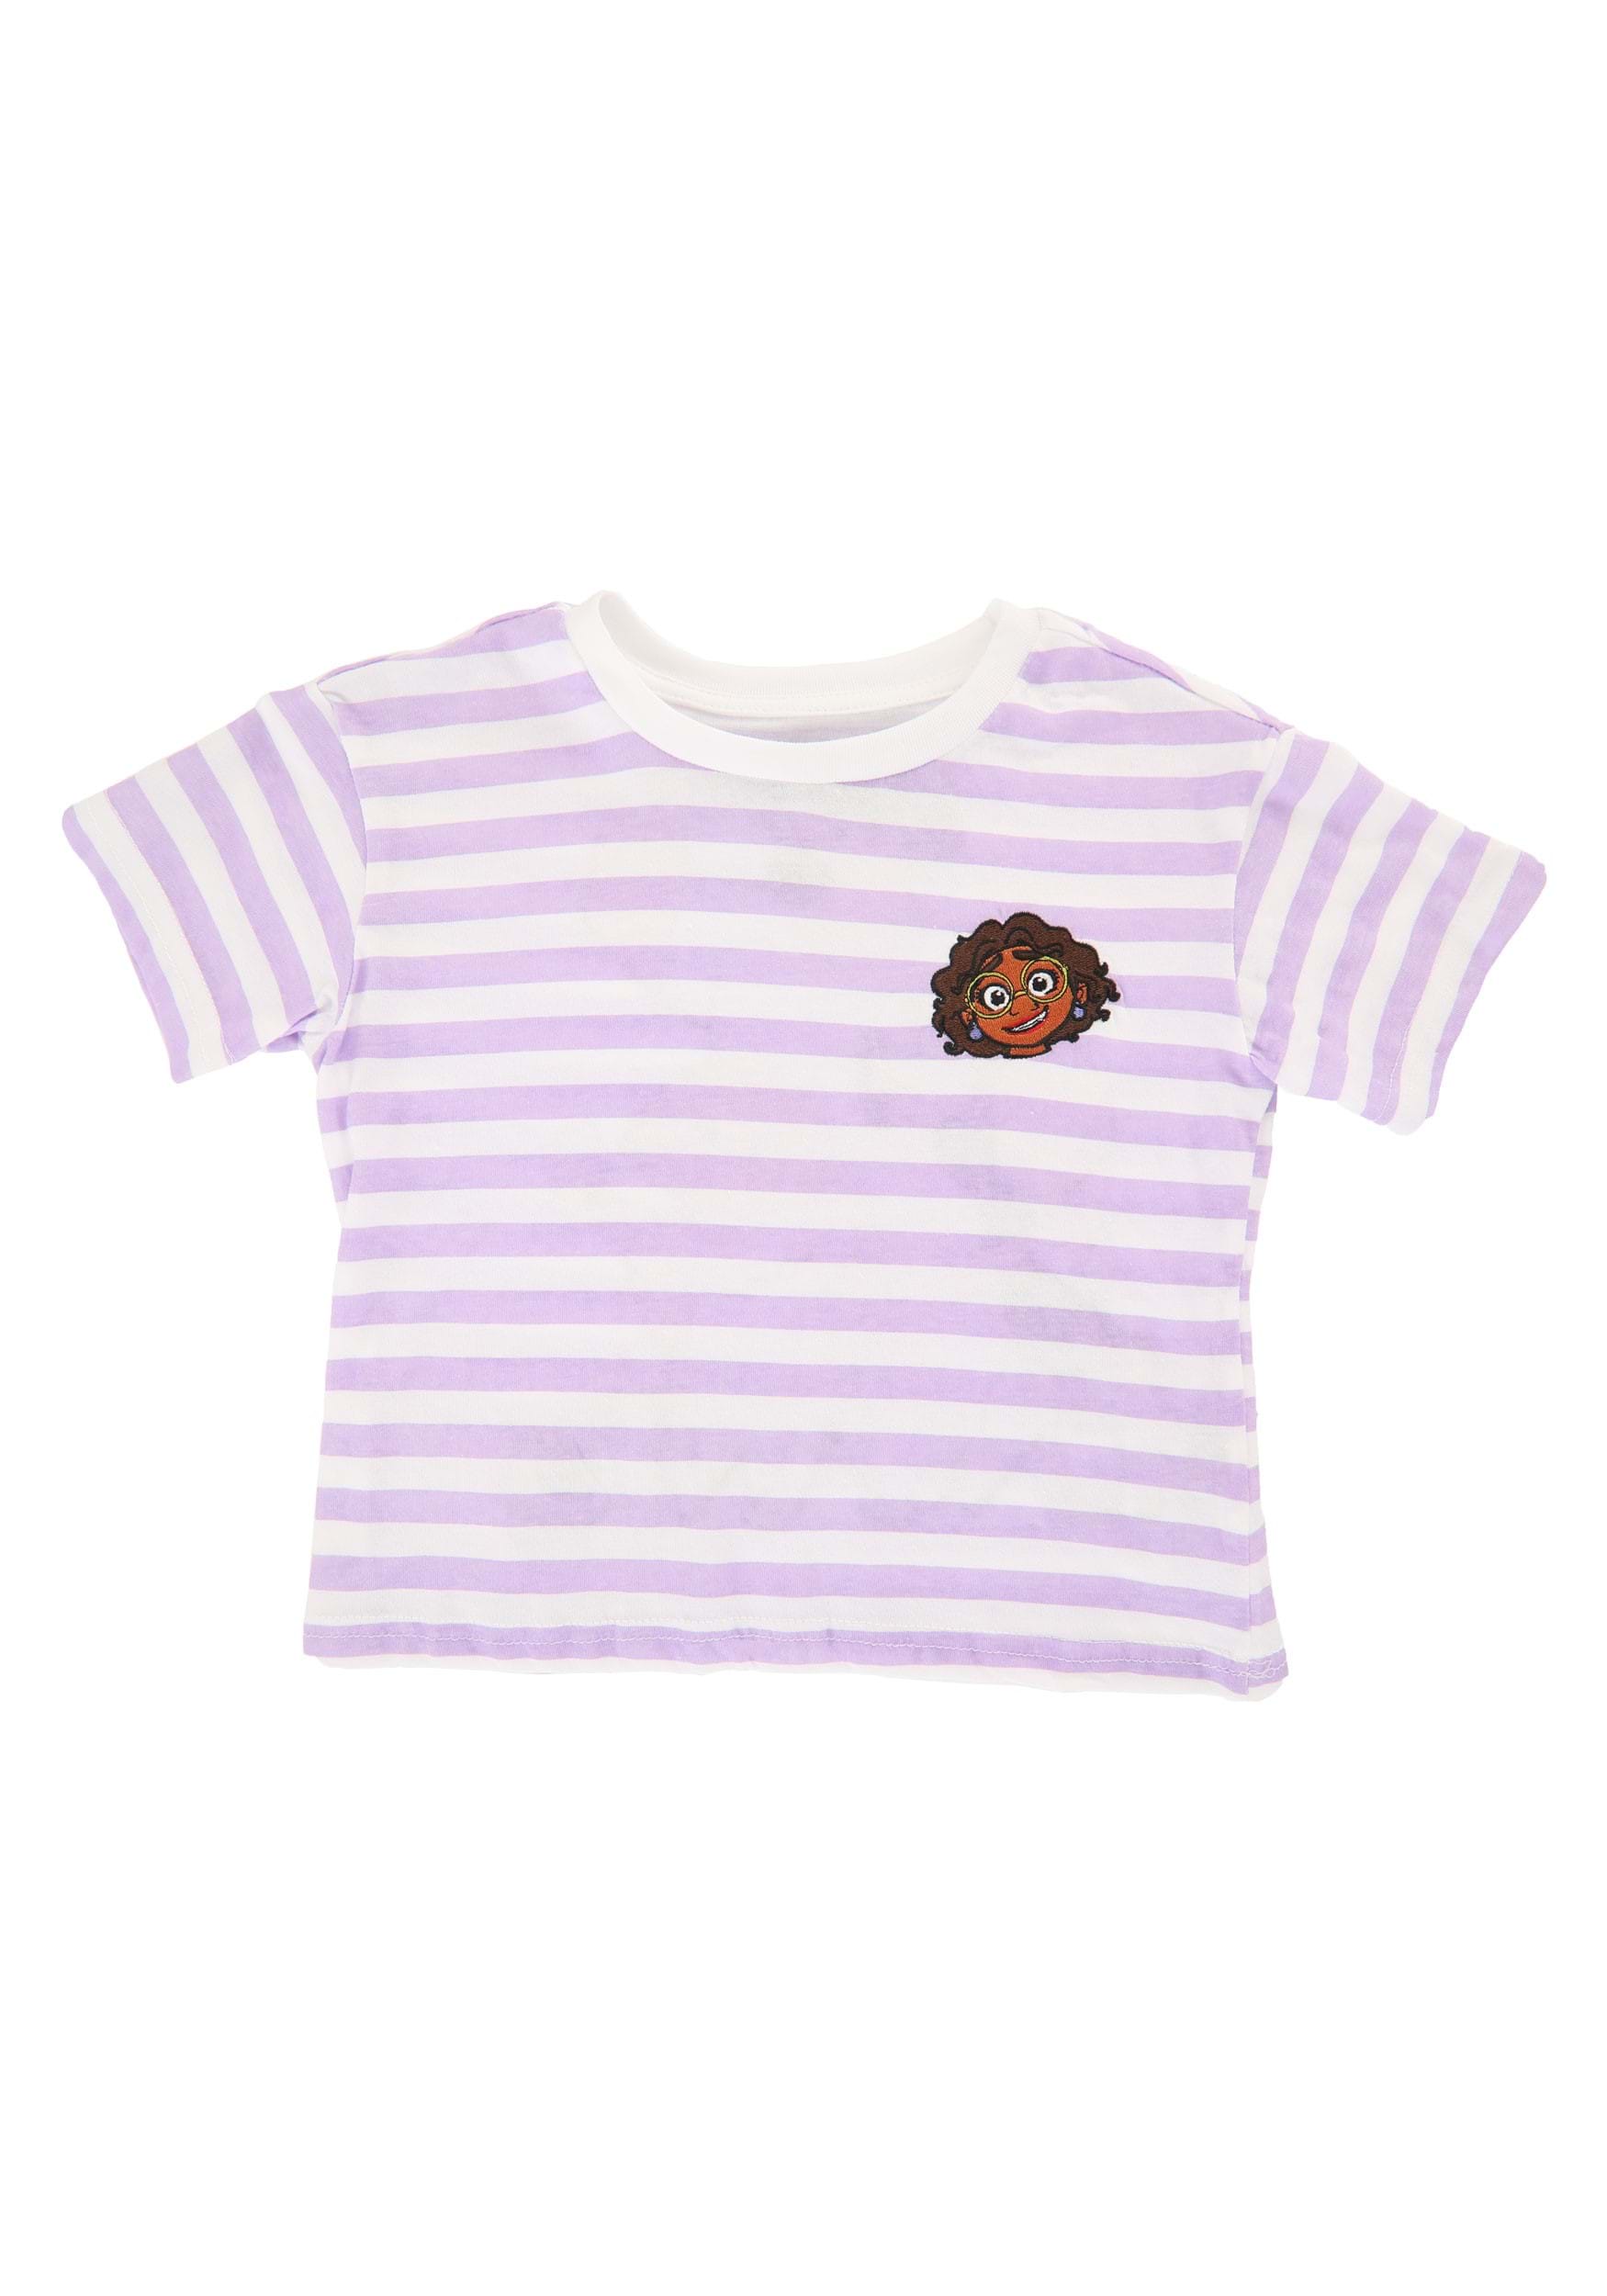 Girls Encanto Embroidered Striped Tee